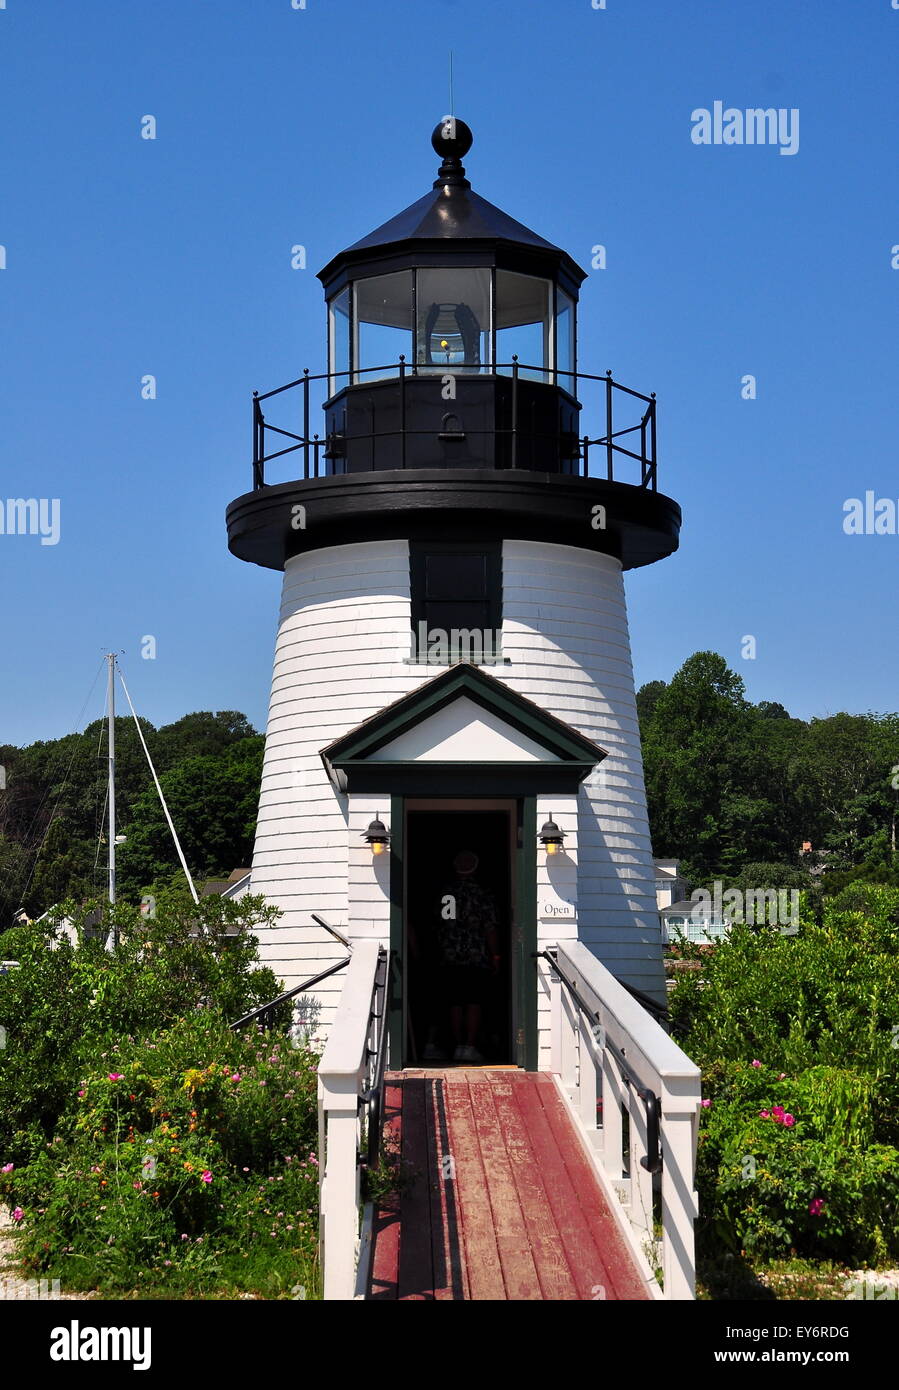 Mystic, CT: 1966 Brant Point Lighthouse, a replica of the original 18th century Nantucket lighthouse, at the Mystic Seaport * Stock Photo